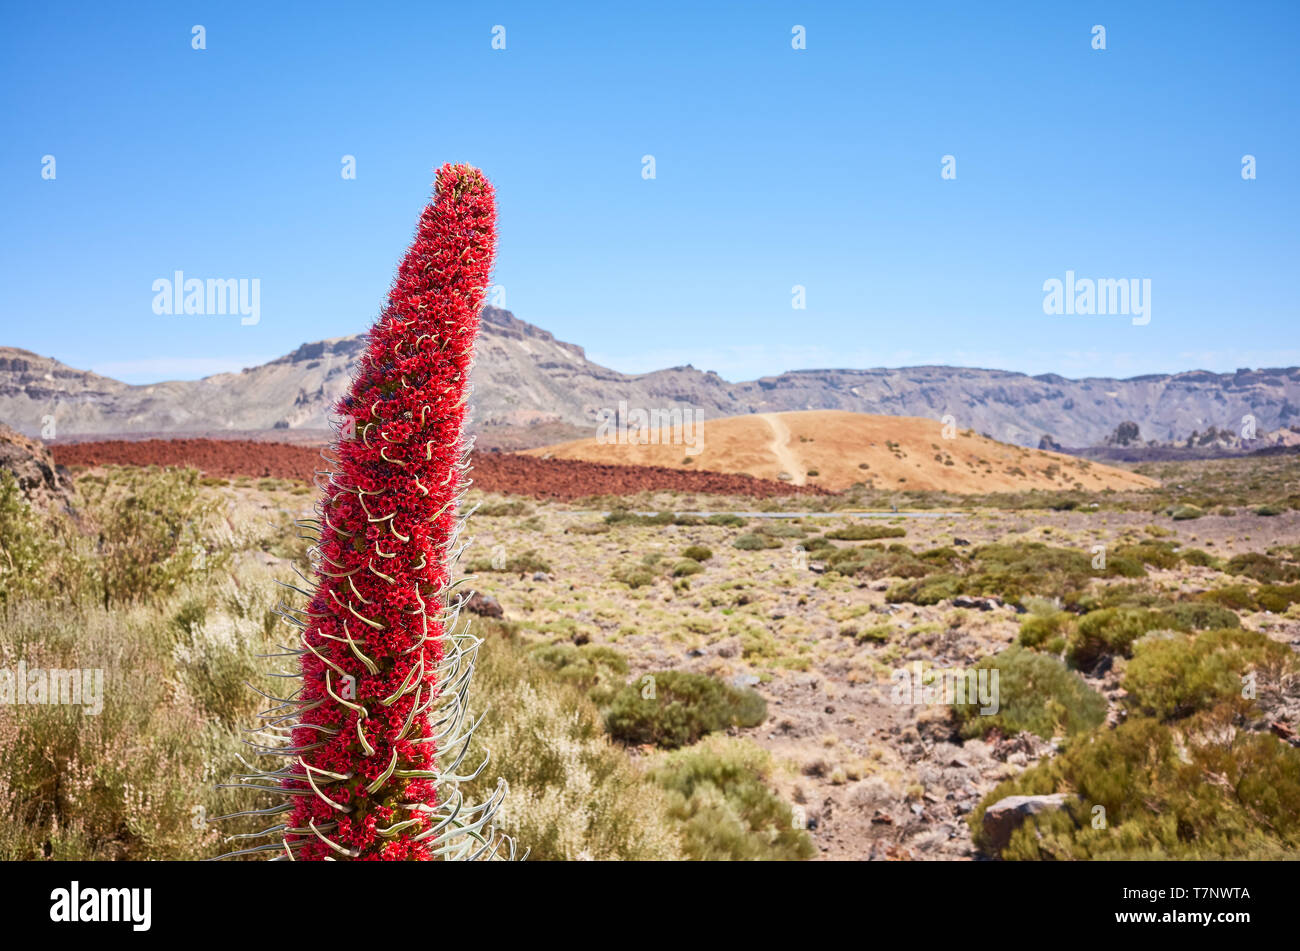 Tower of jewels plant (Echium wildpretii), endemic species to the island of Tenerife in Teide National Park, Spain. Stock Photo